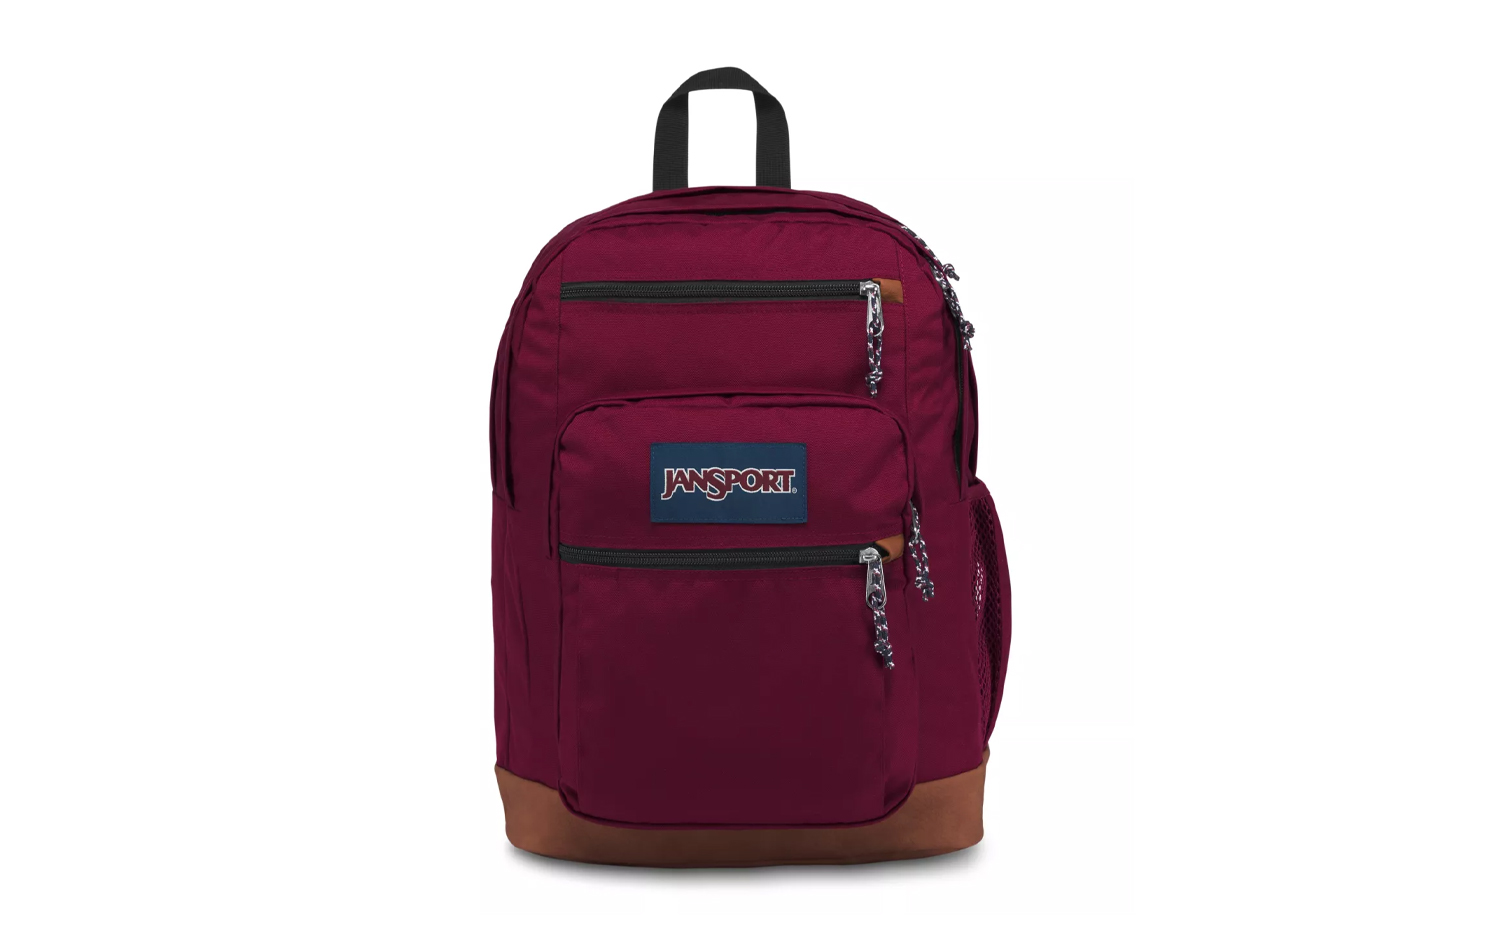 Best Back-to-School Accessories for MacBook: JanSport Cool Student Backpack on White Background